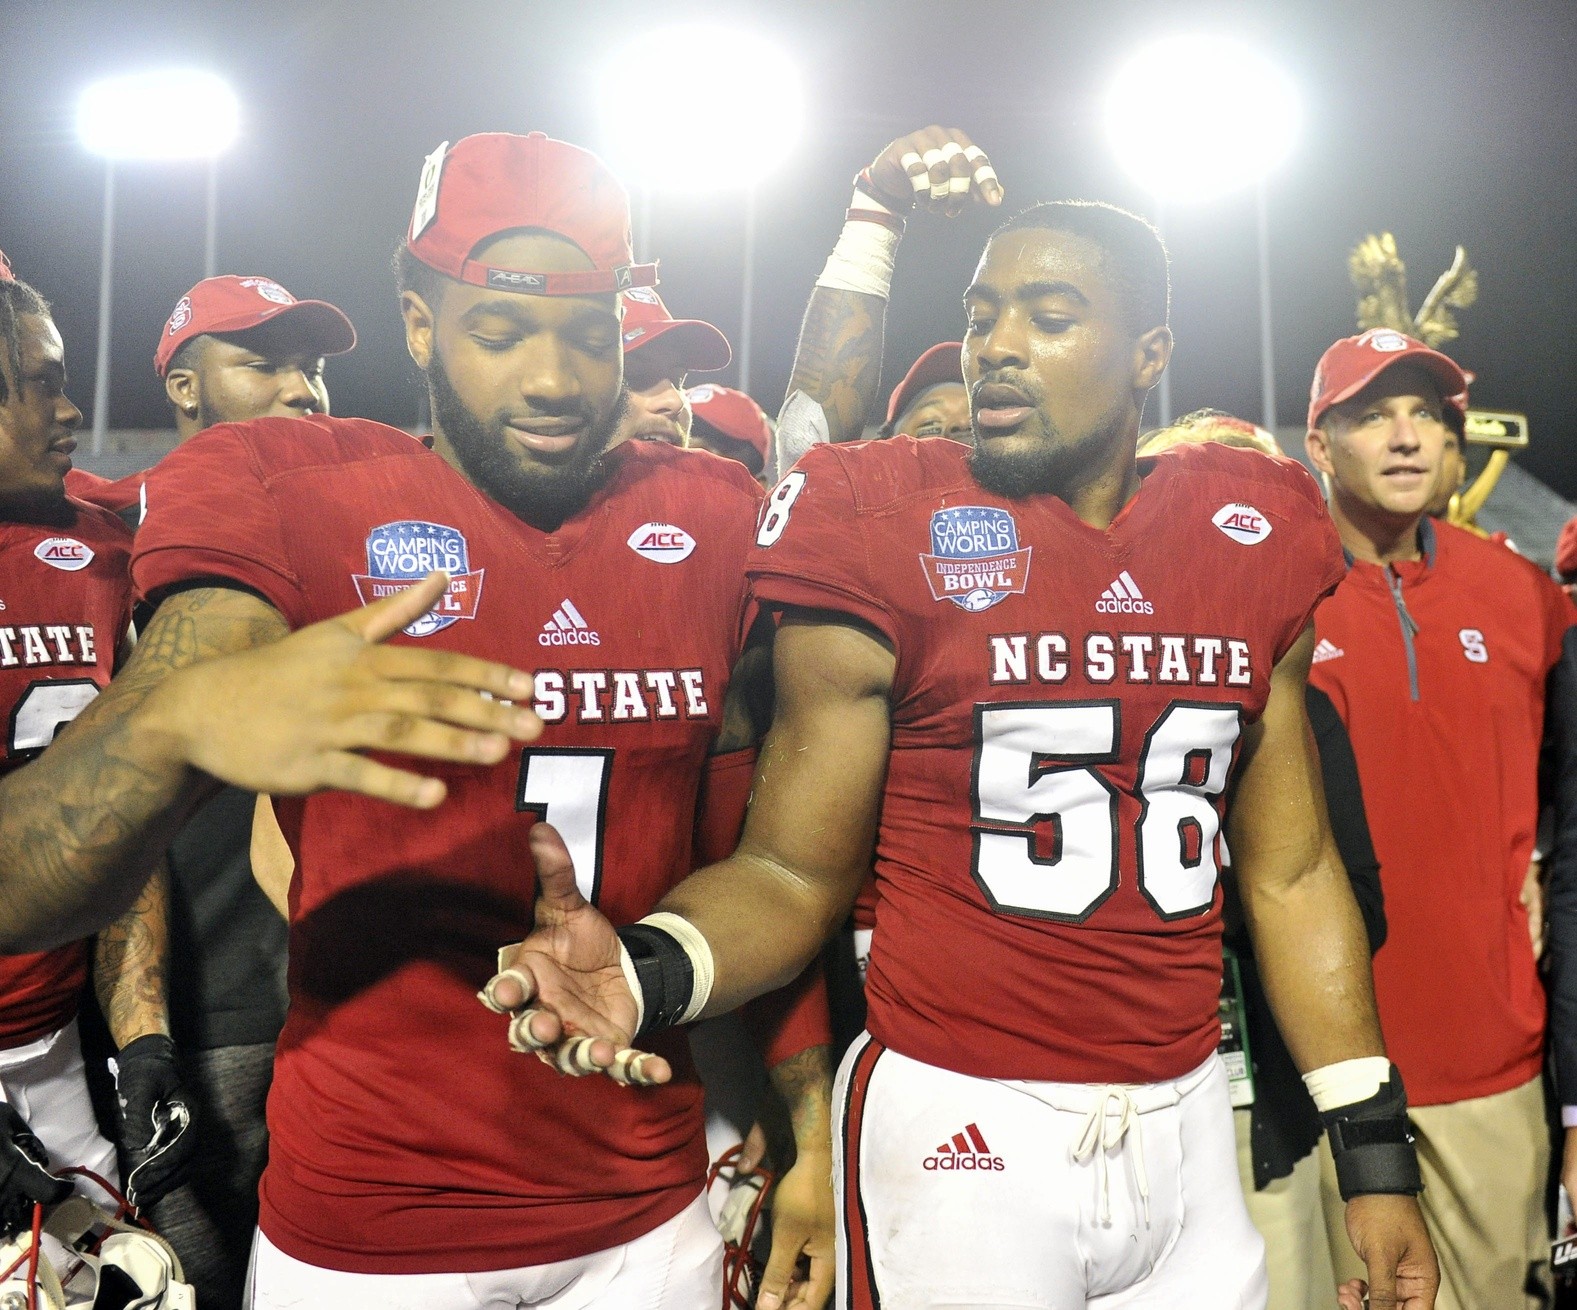 A Snapshot of NC State’s Bowl History